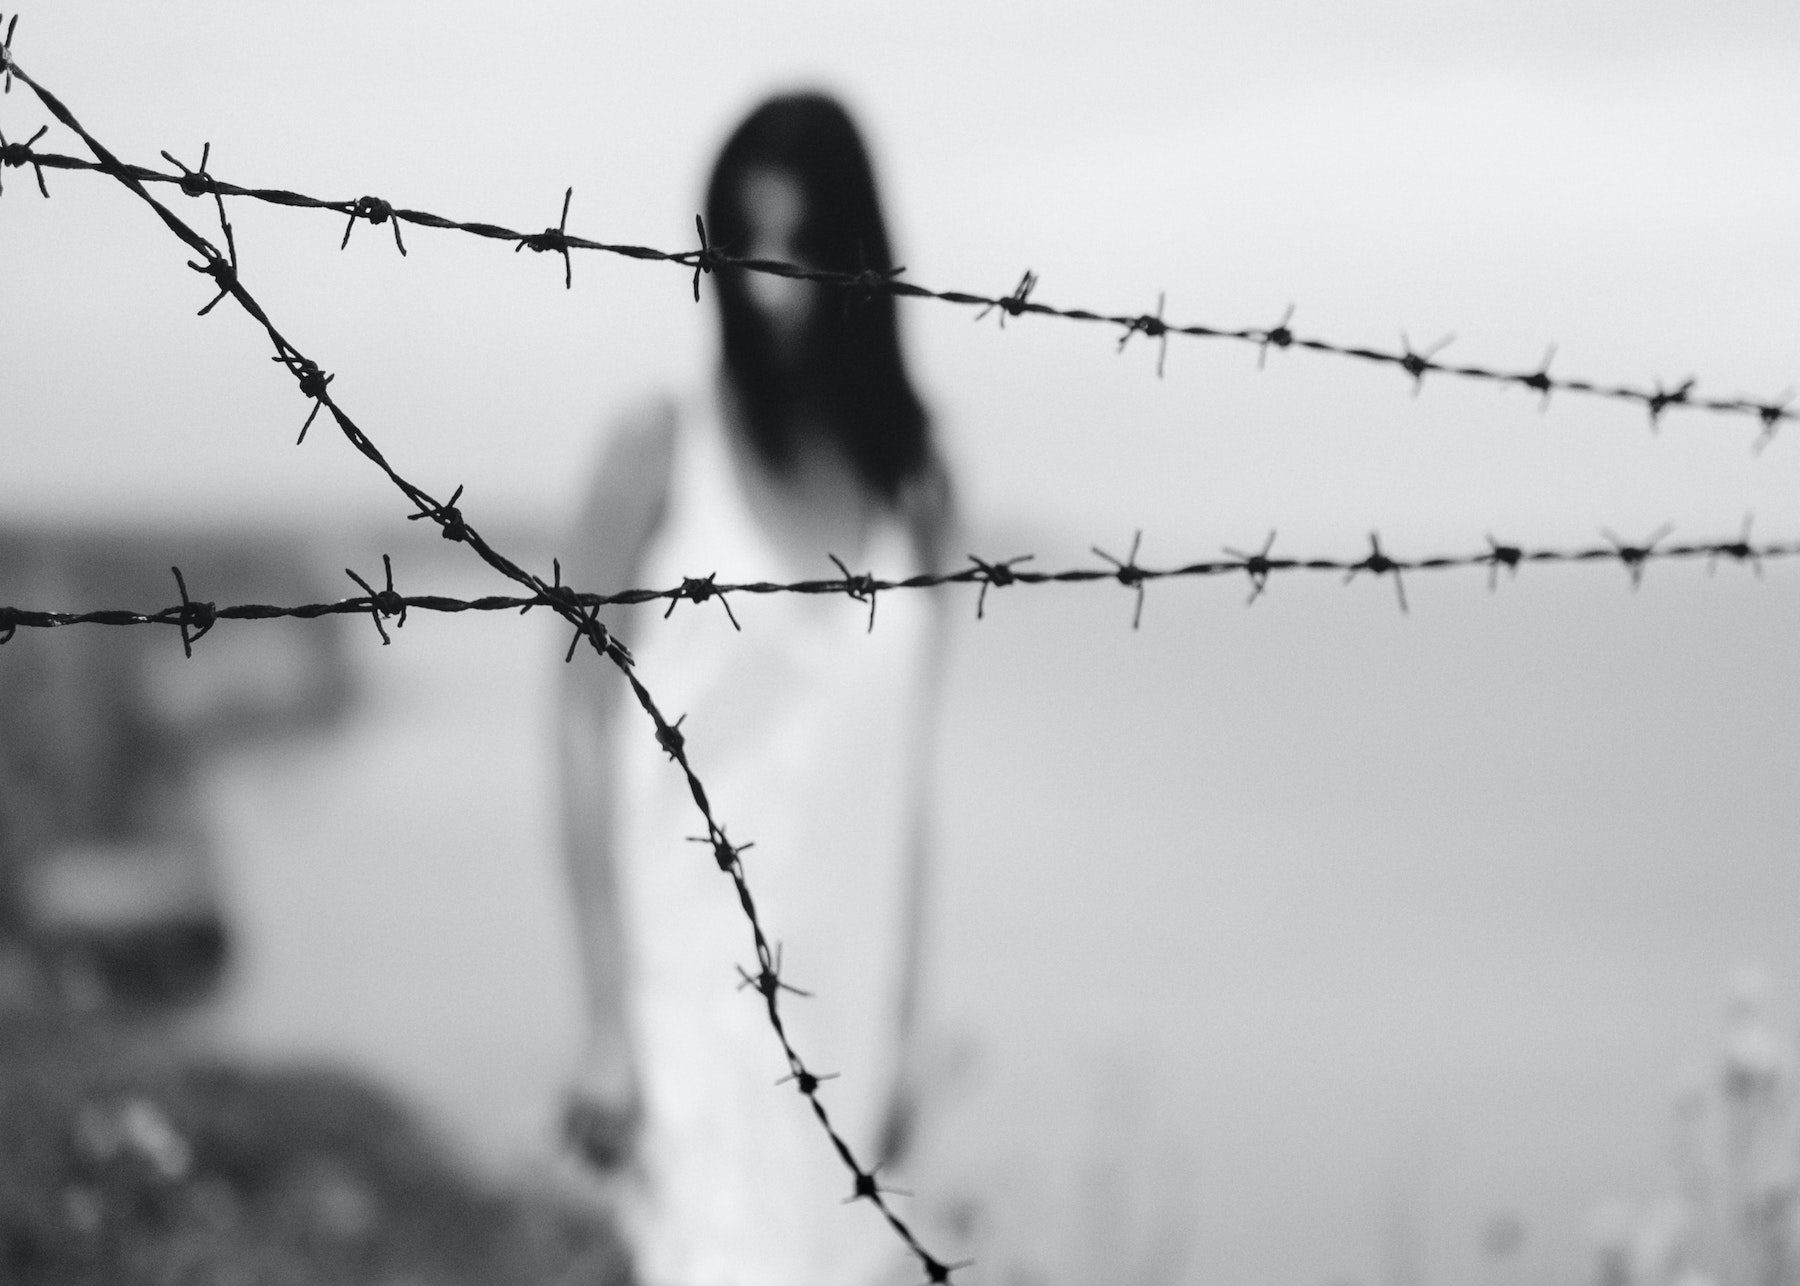 Blurred and eerie woman with dark hair in a white dress behind in-focus barbed wire.